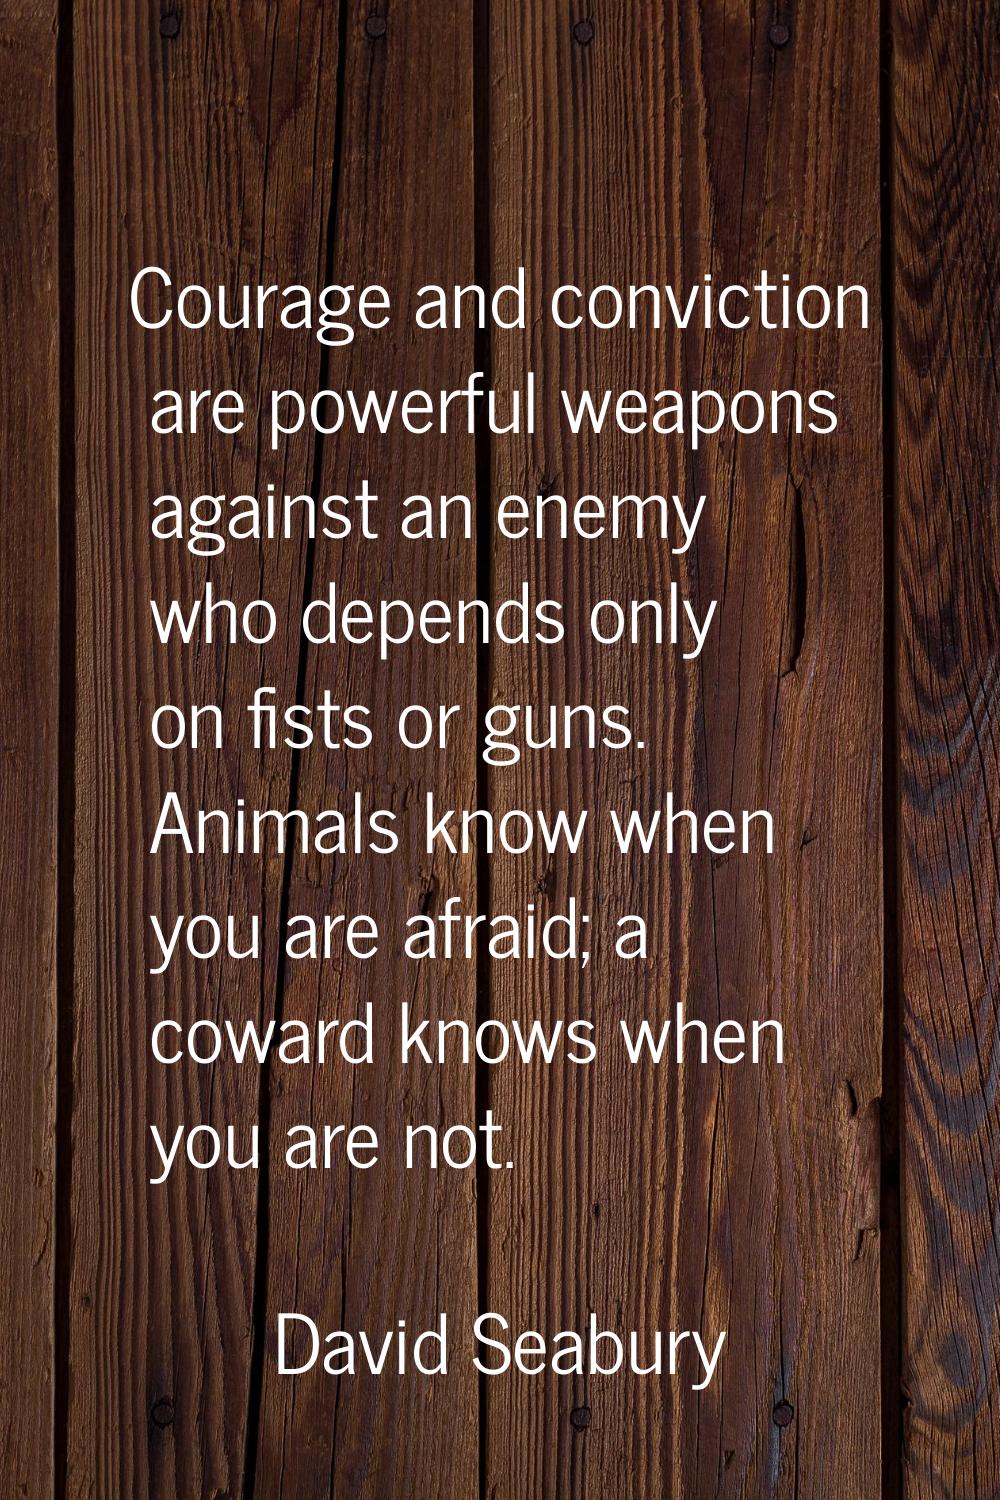 Courage and conviction are powerful weapons against an enemy who depends only on fists or guns. Ani